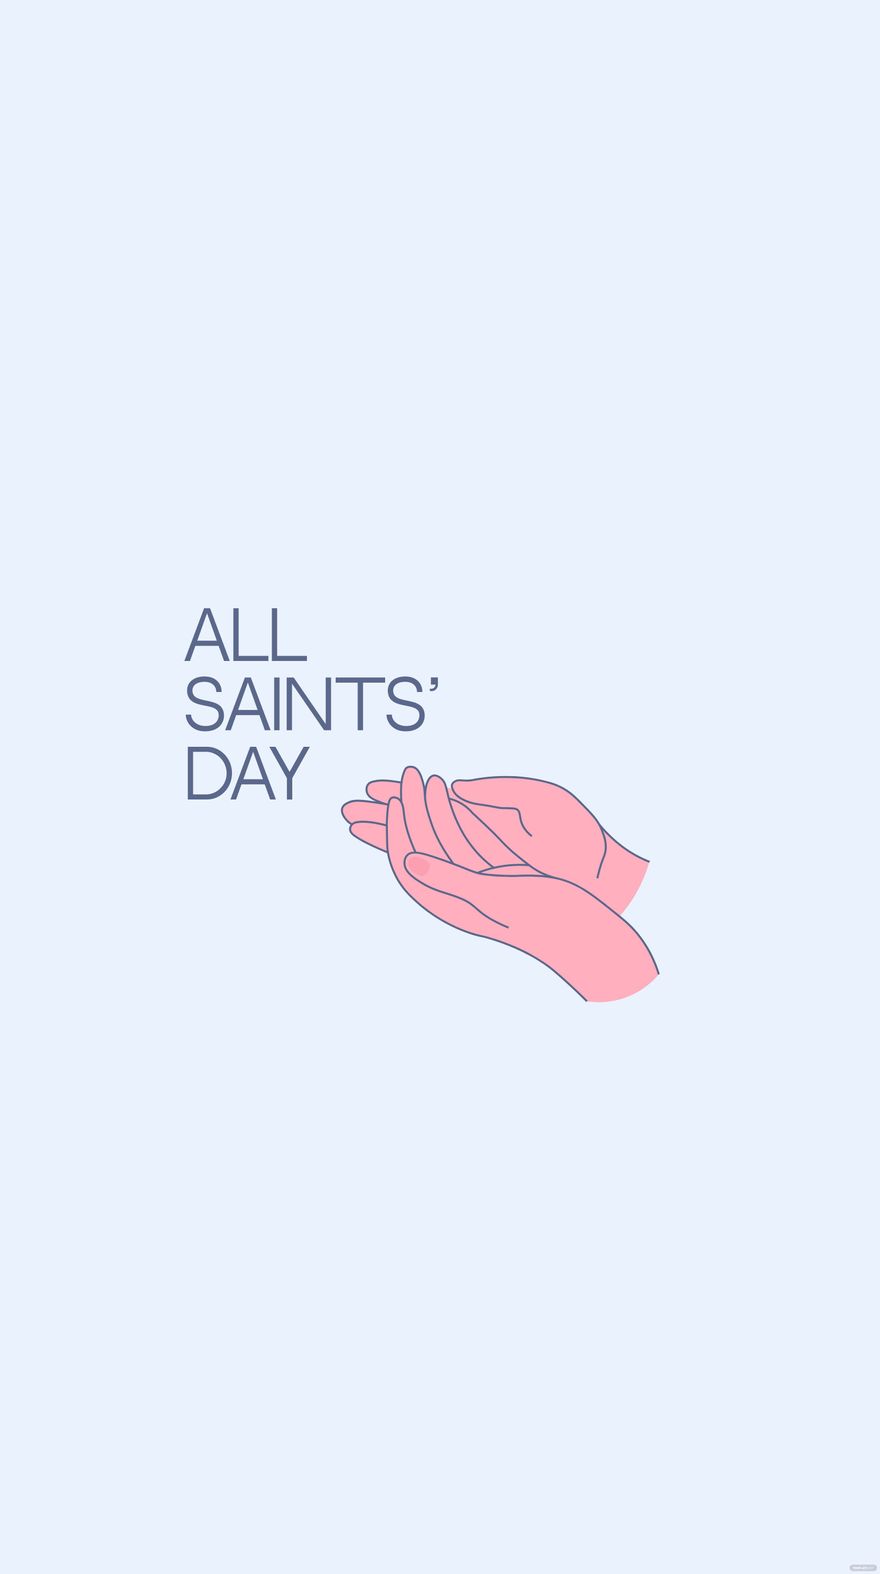 All Saints' Day iPhone Background in PDF, Illustrator, PSD, EPS, SVG, JPG, PNG